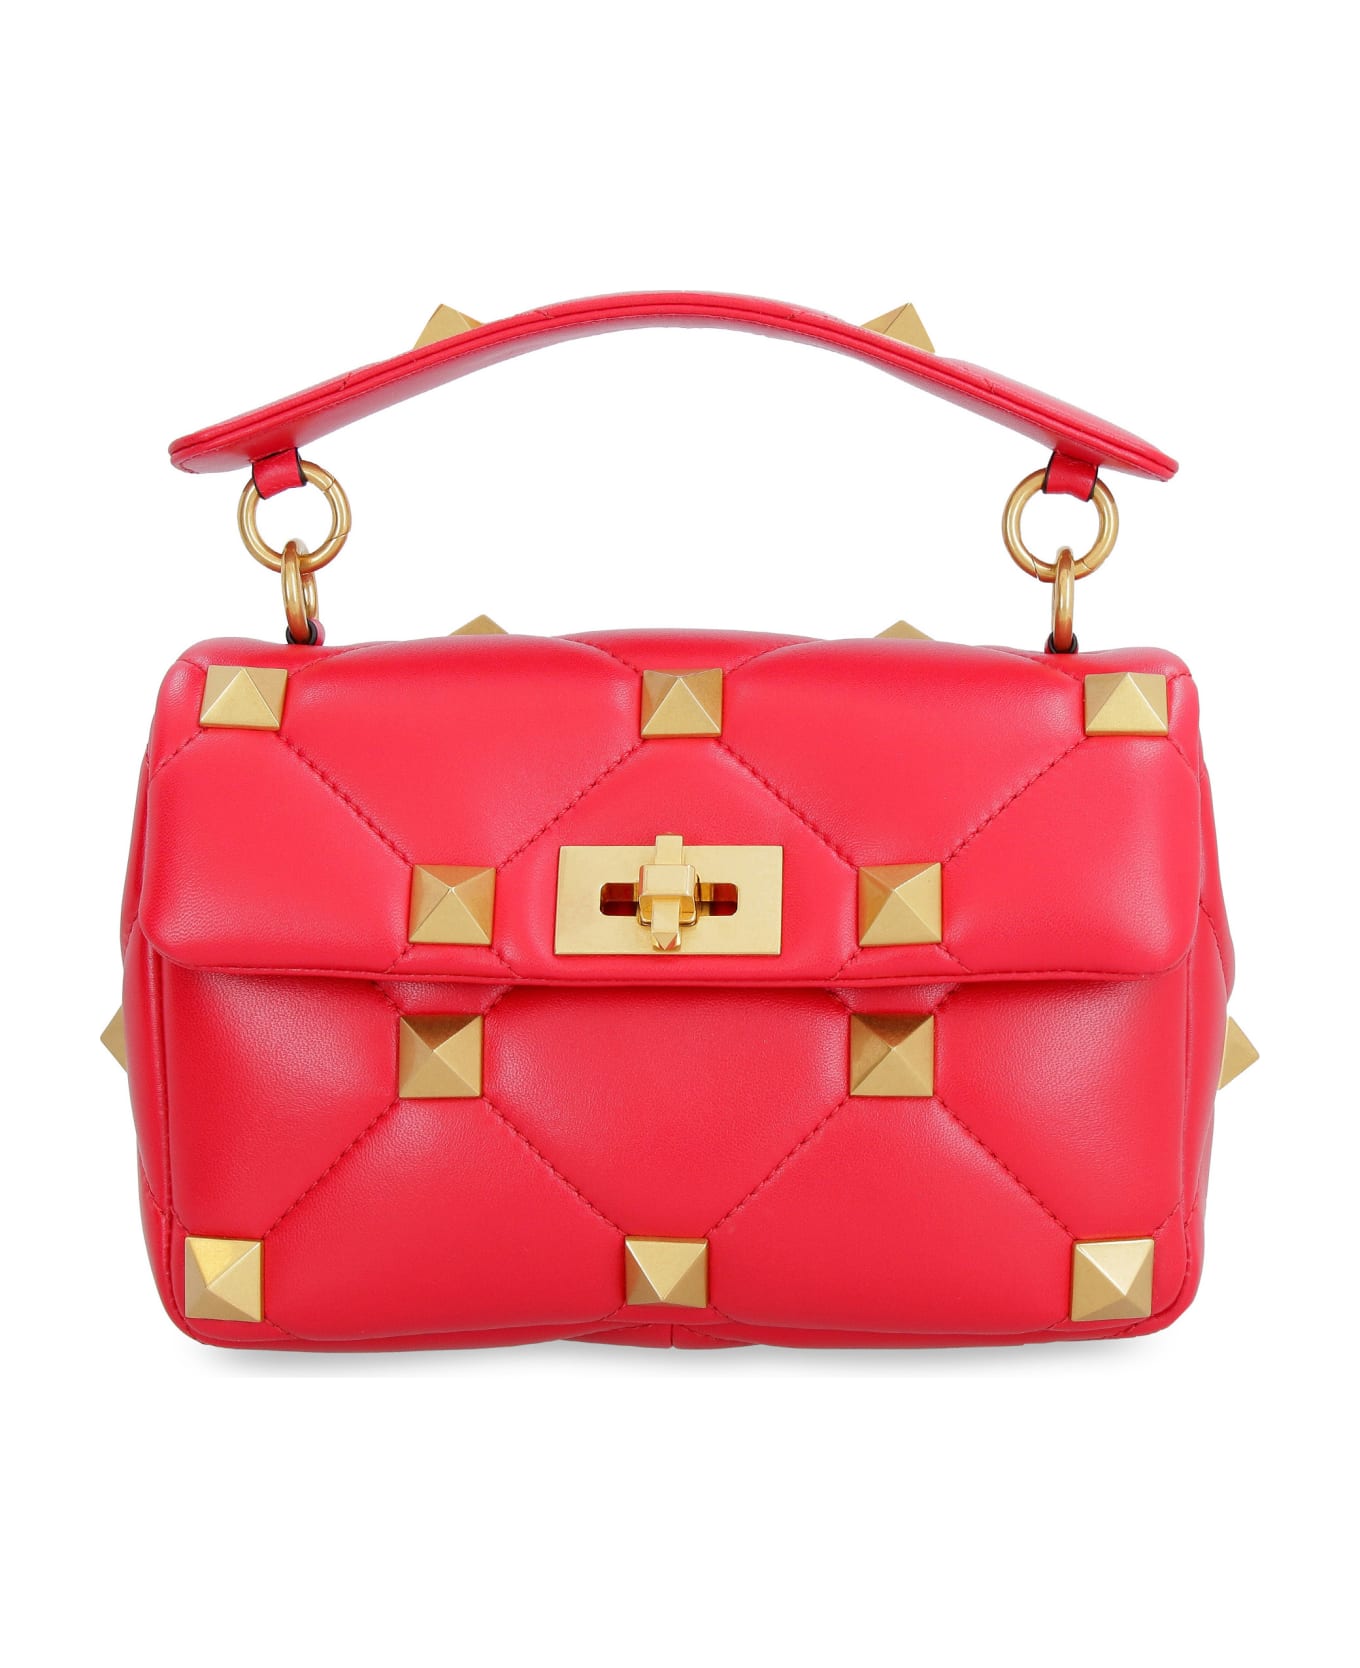 Valentino Garavani - Roman Stud Quilted Leather Bag - red トートバッグ